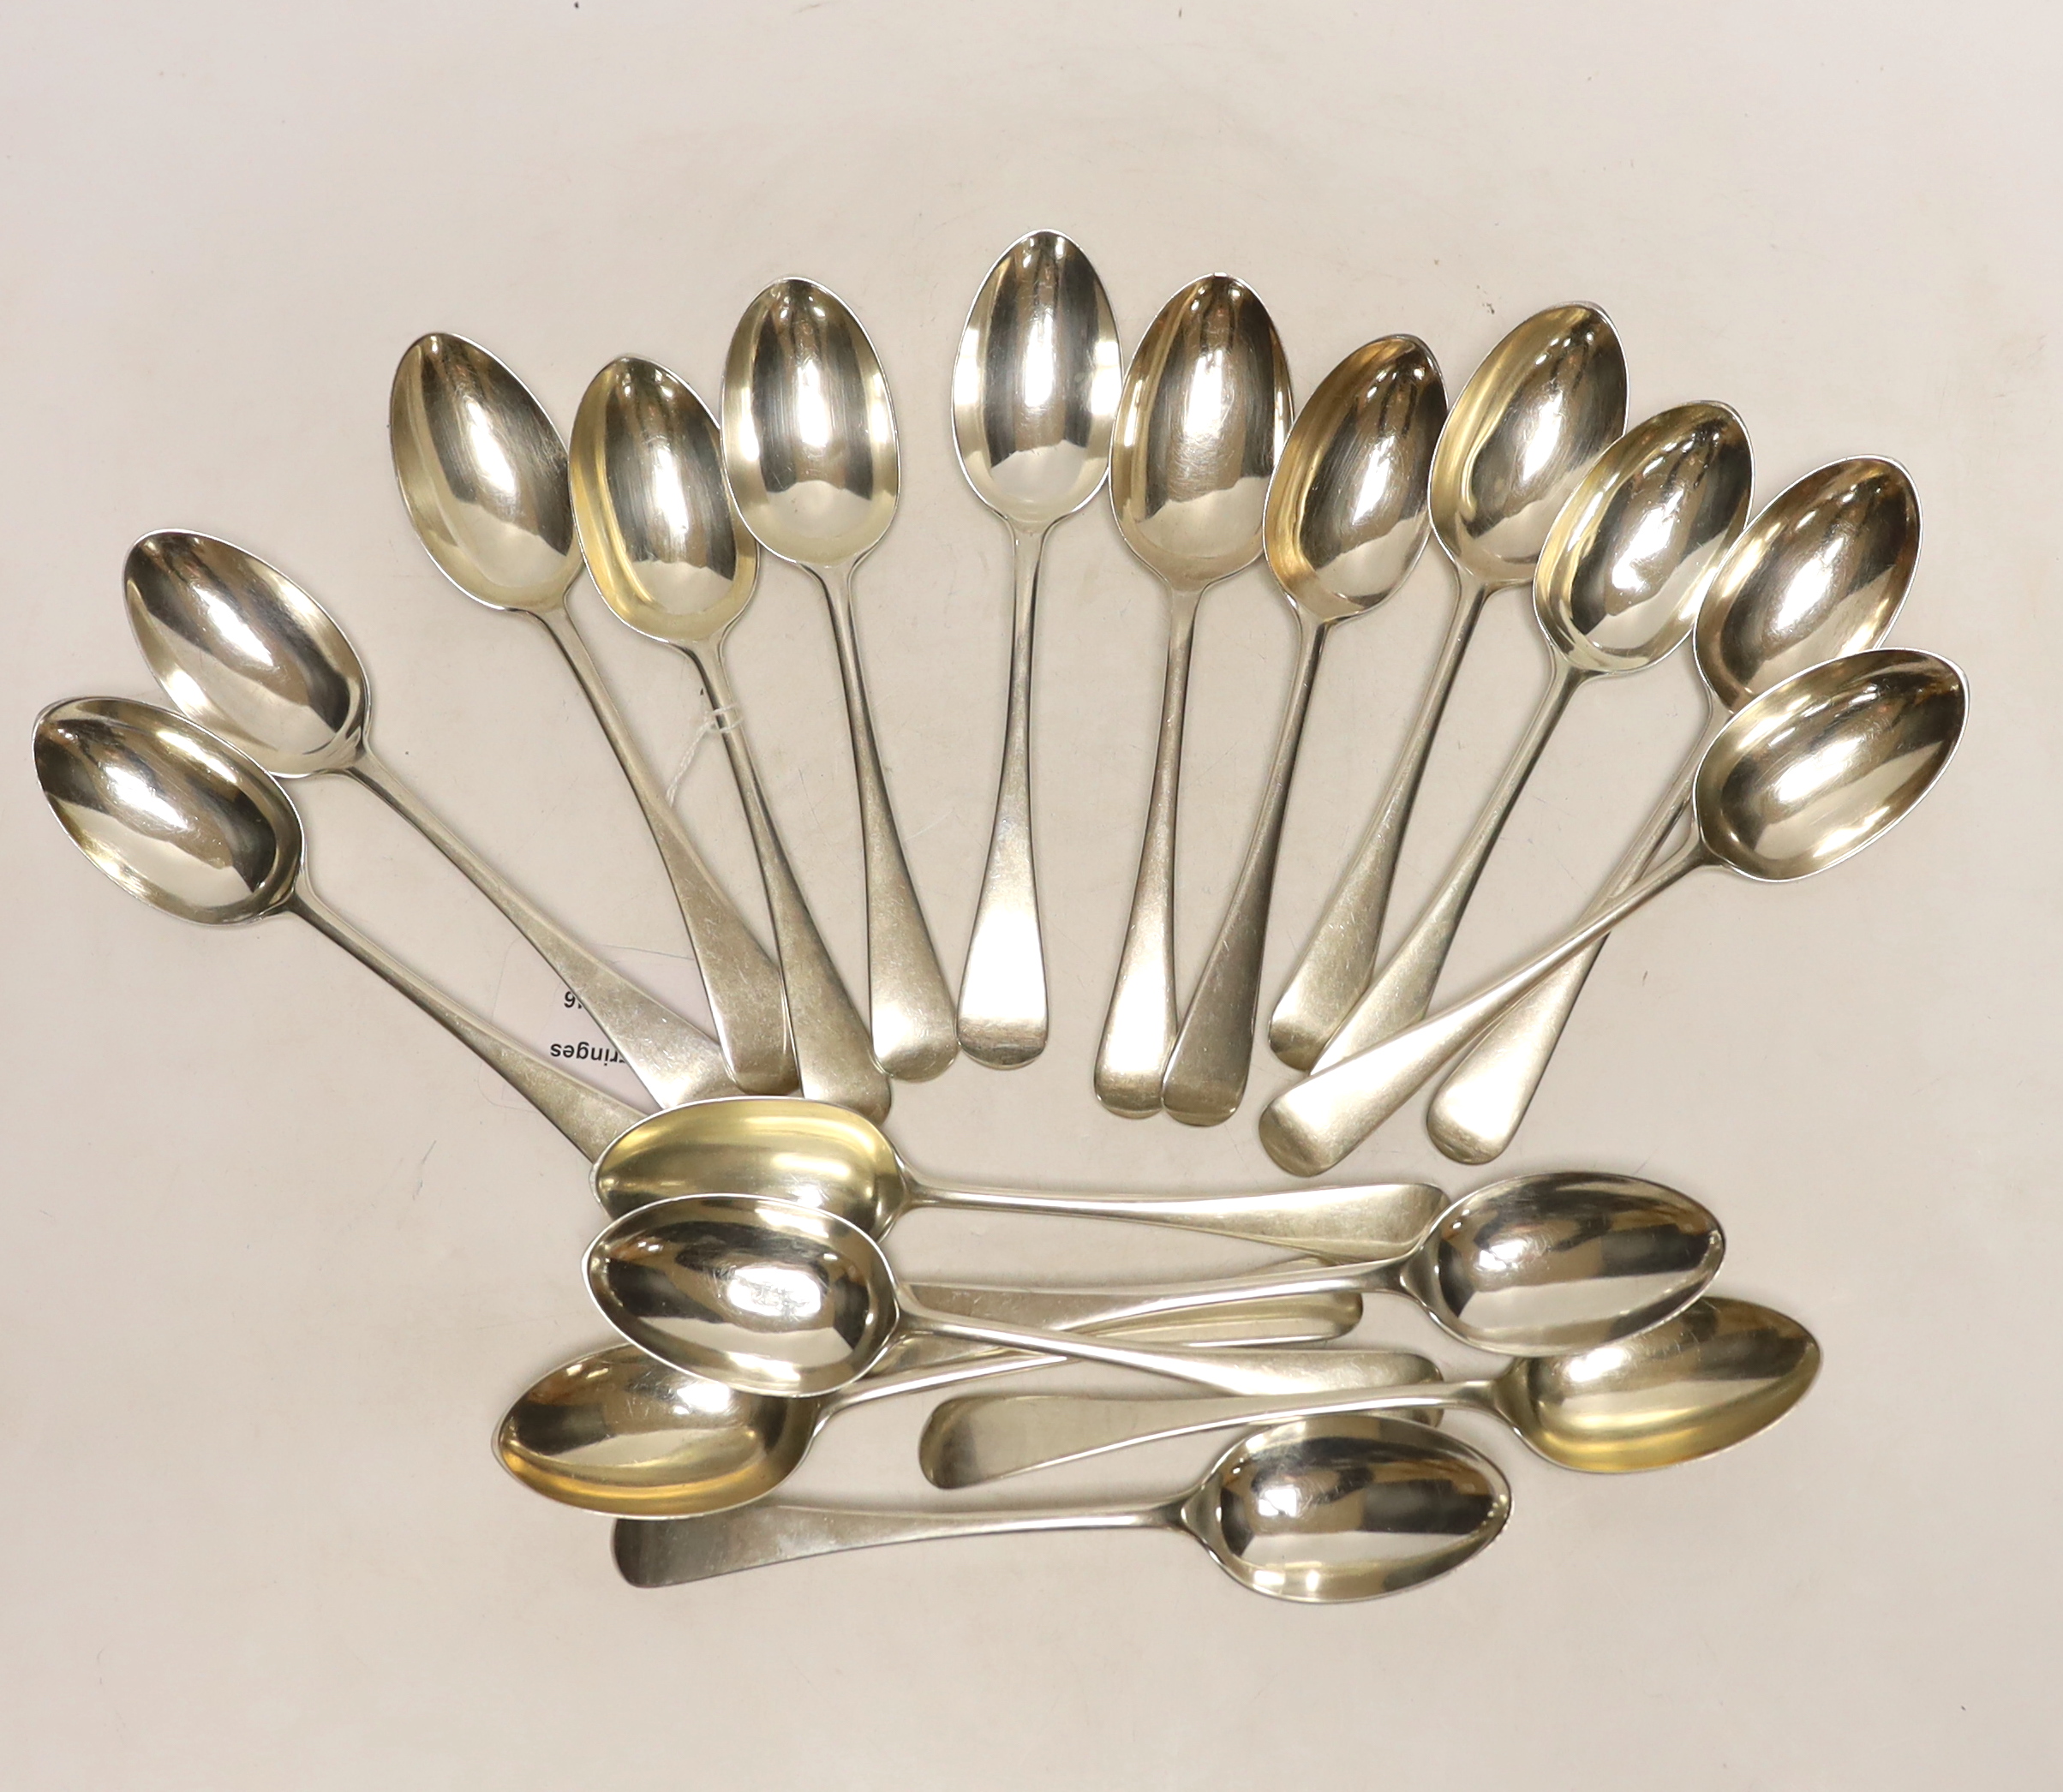 Eleven Gorge V silver Old English pattern dessert spoons, Goldsmiths & Silversmiths Co Ltd, London, 1930 and seven other silver dessert spoons, 29oz.